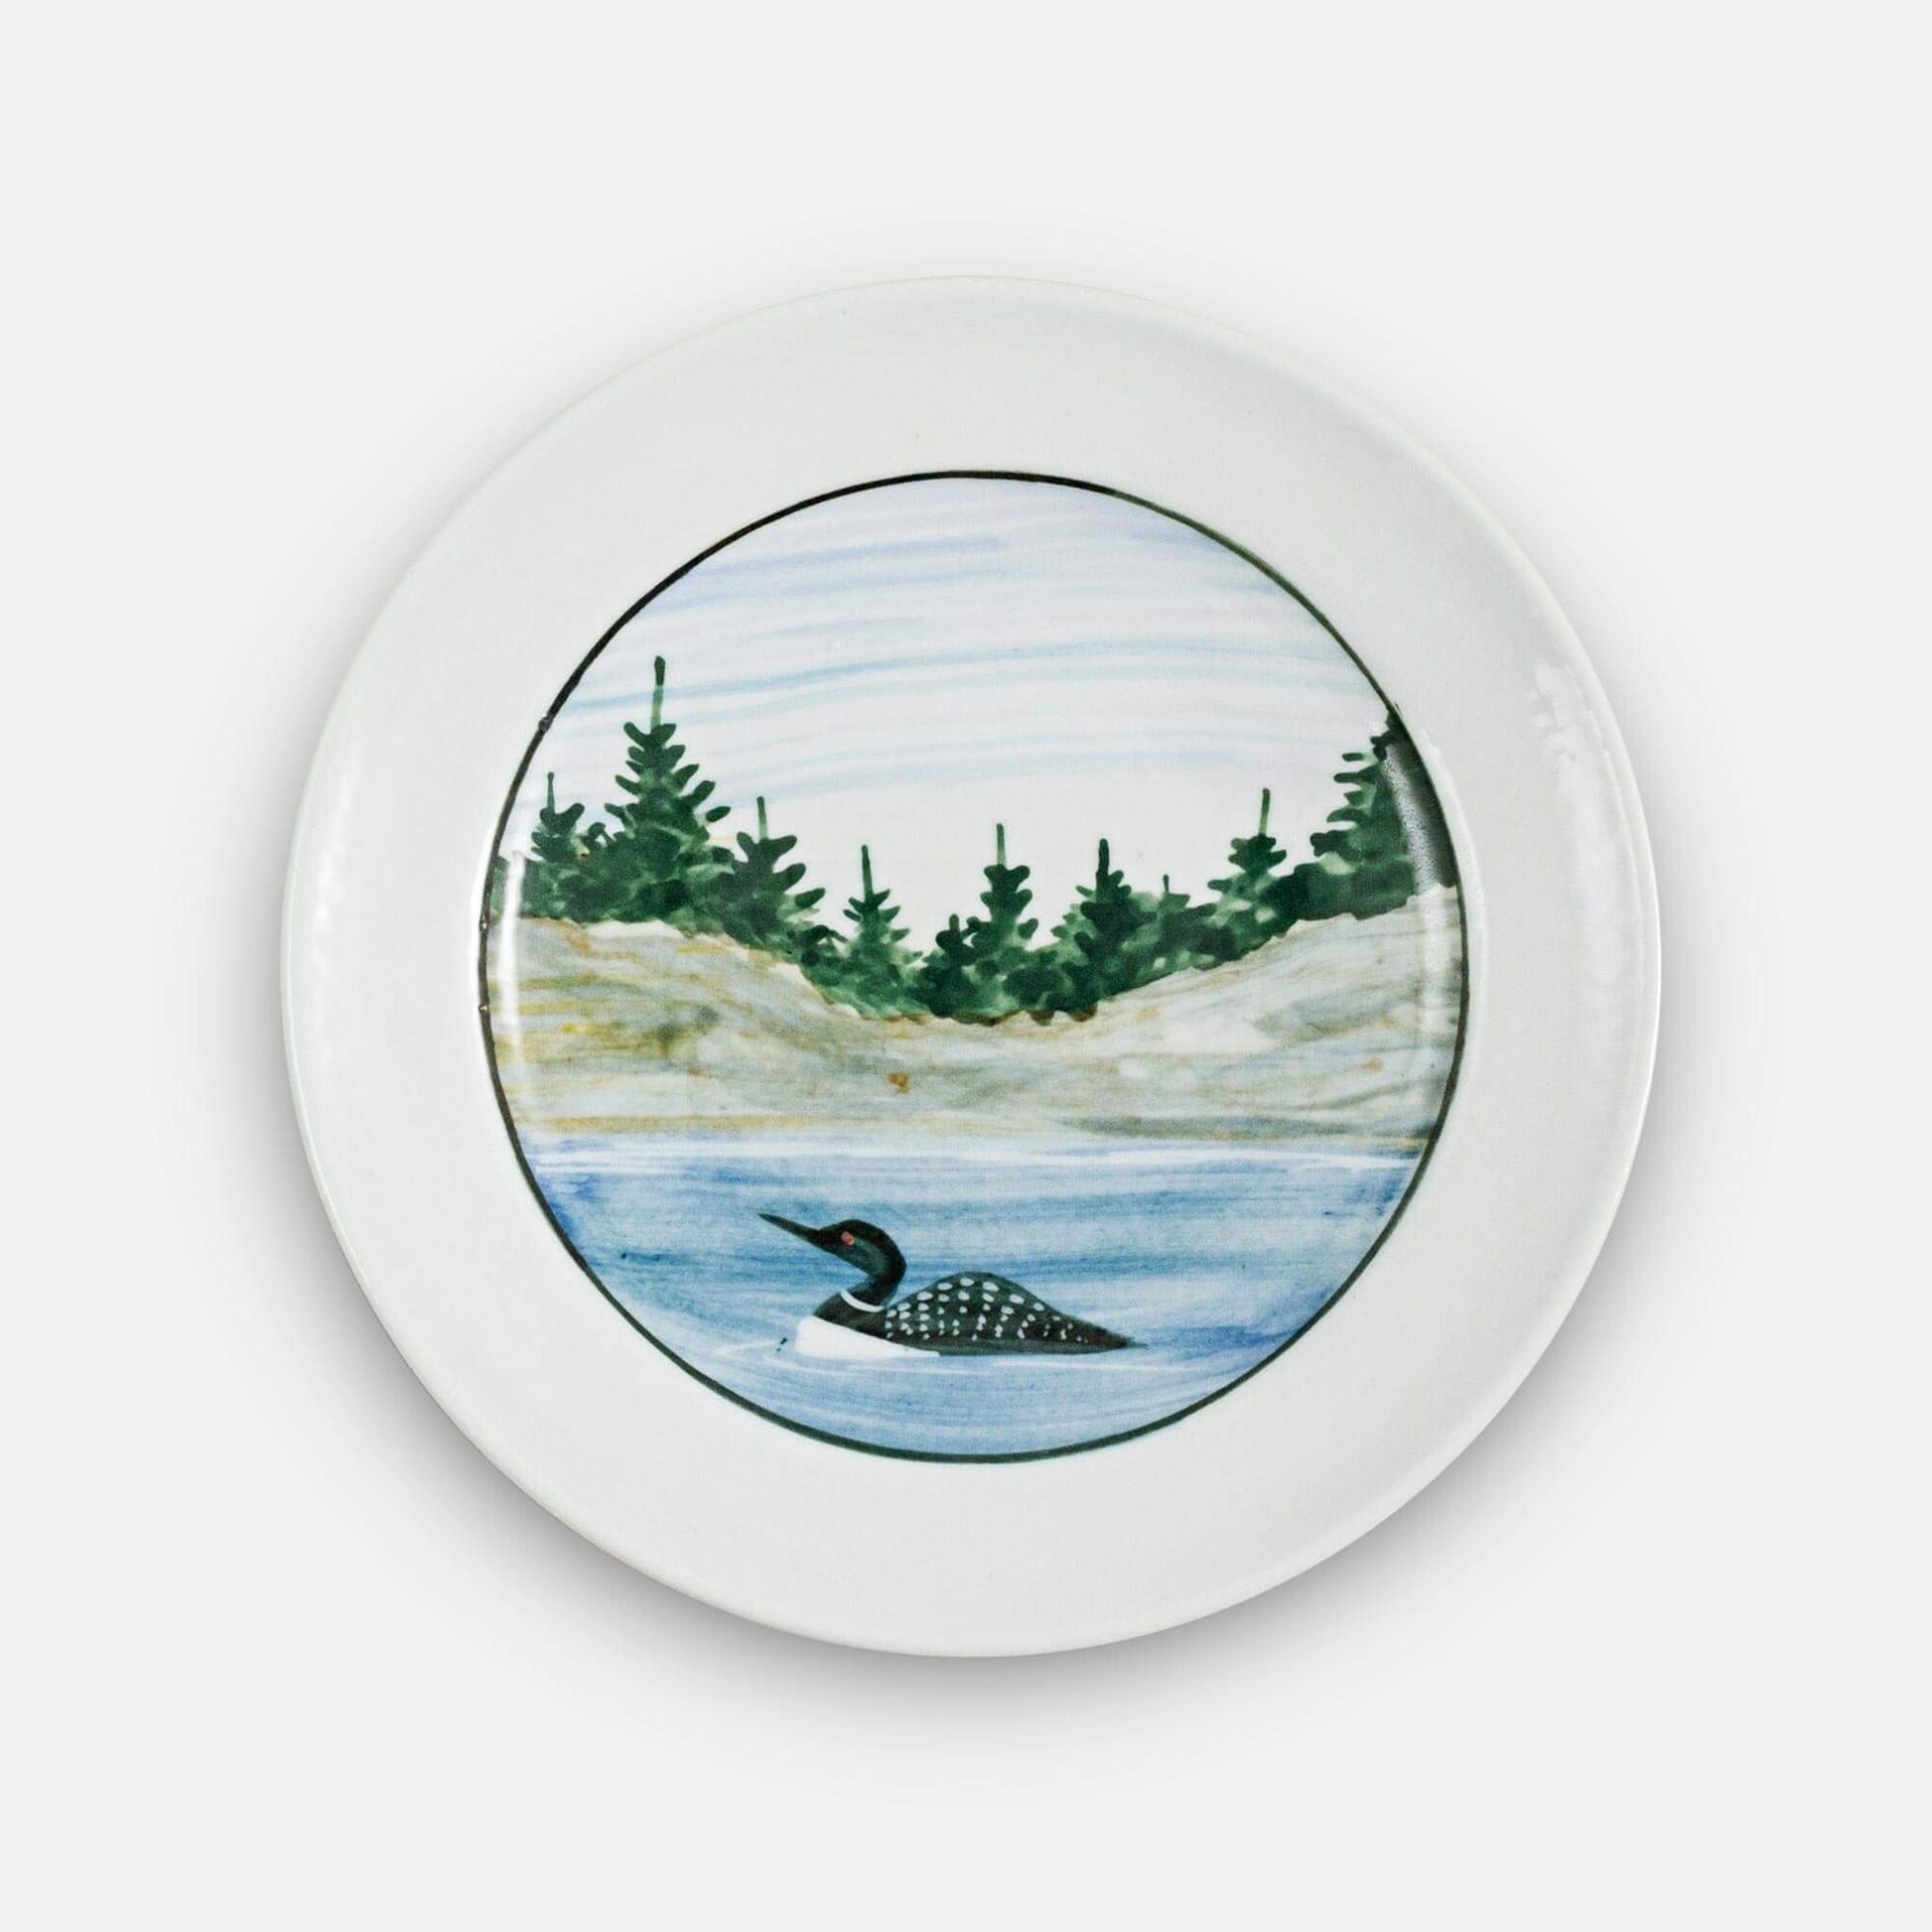 Handmade Pottery Classic Dinner Plate in Loon pattern made by Georgetown Pottery in Maine